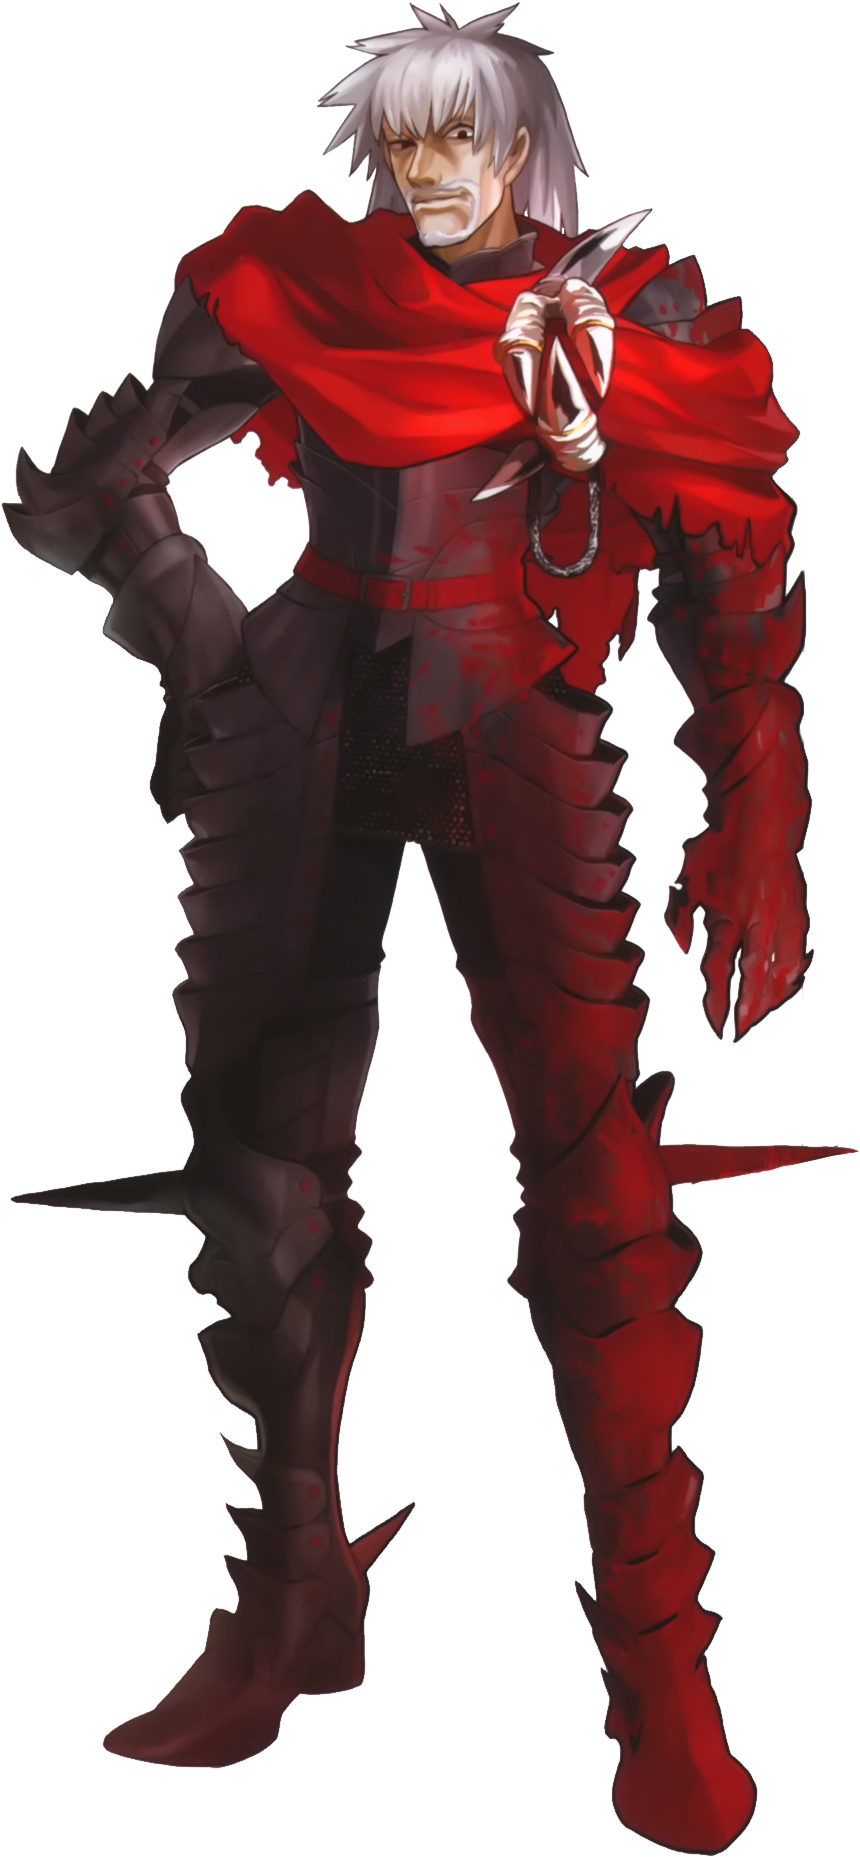 Red Cloaked Anime Warrior PNG